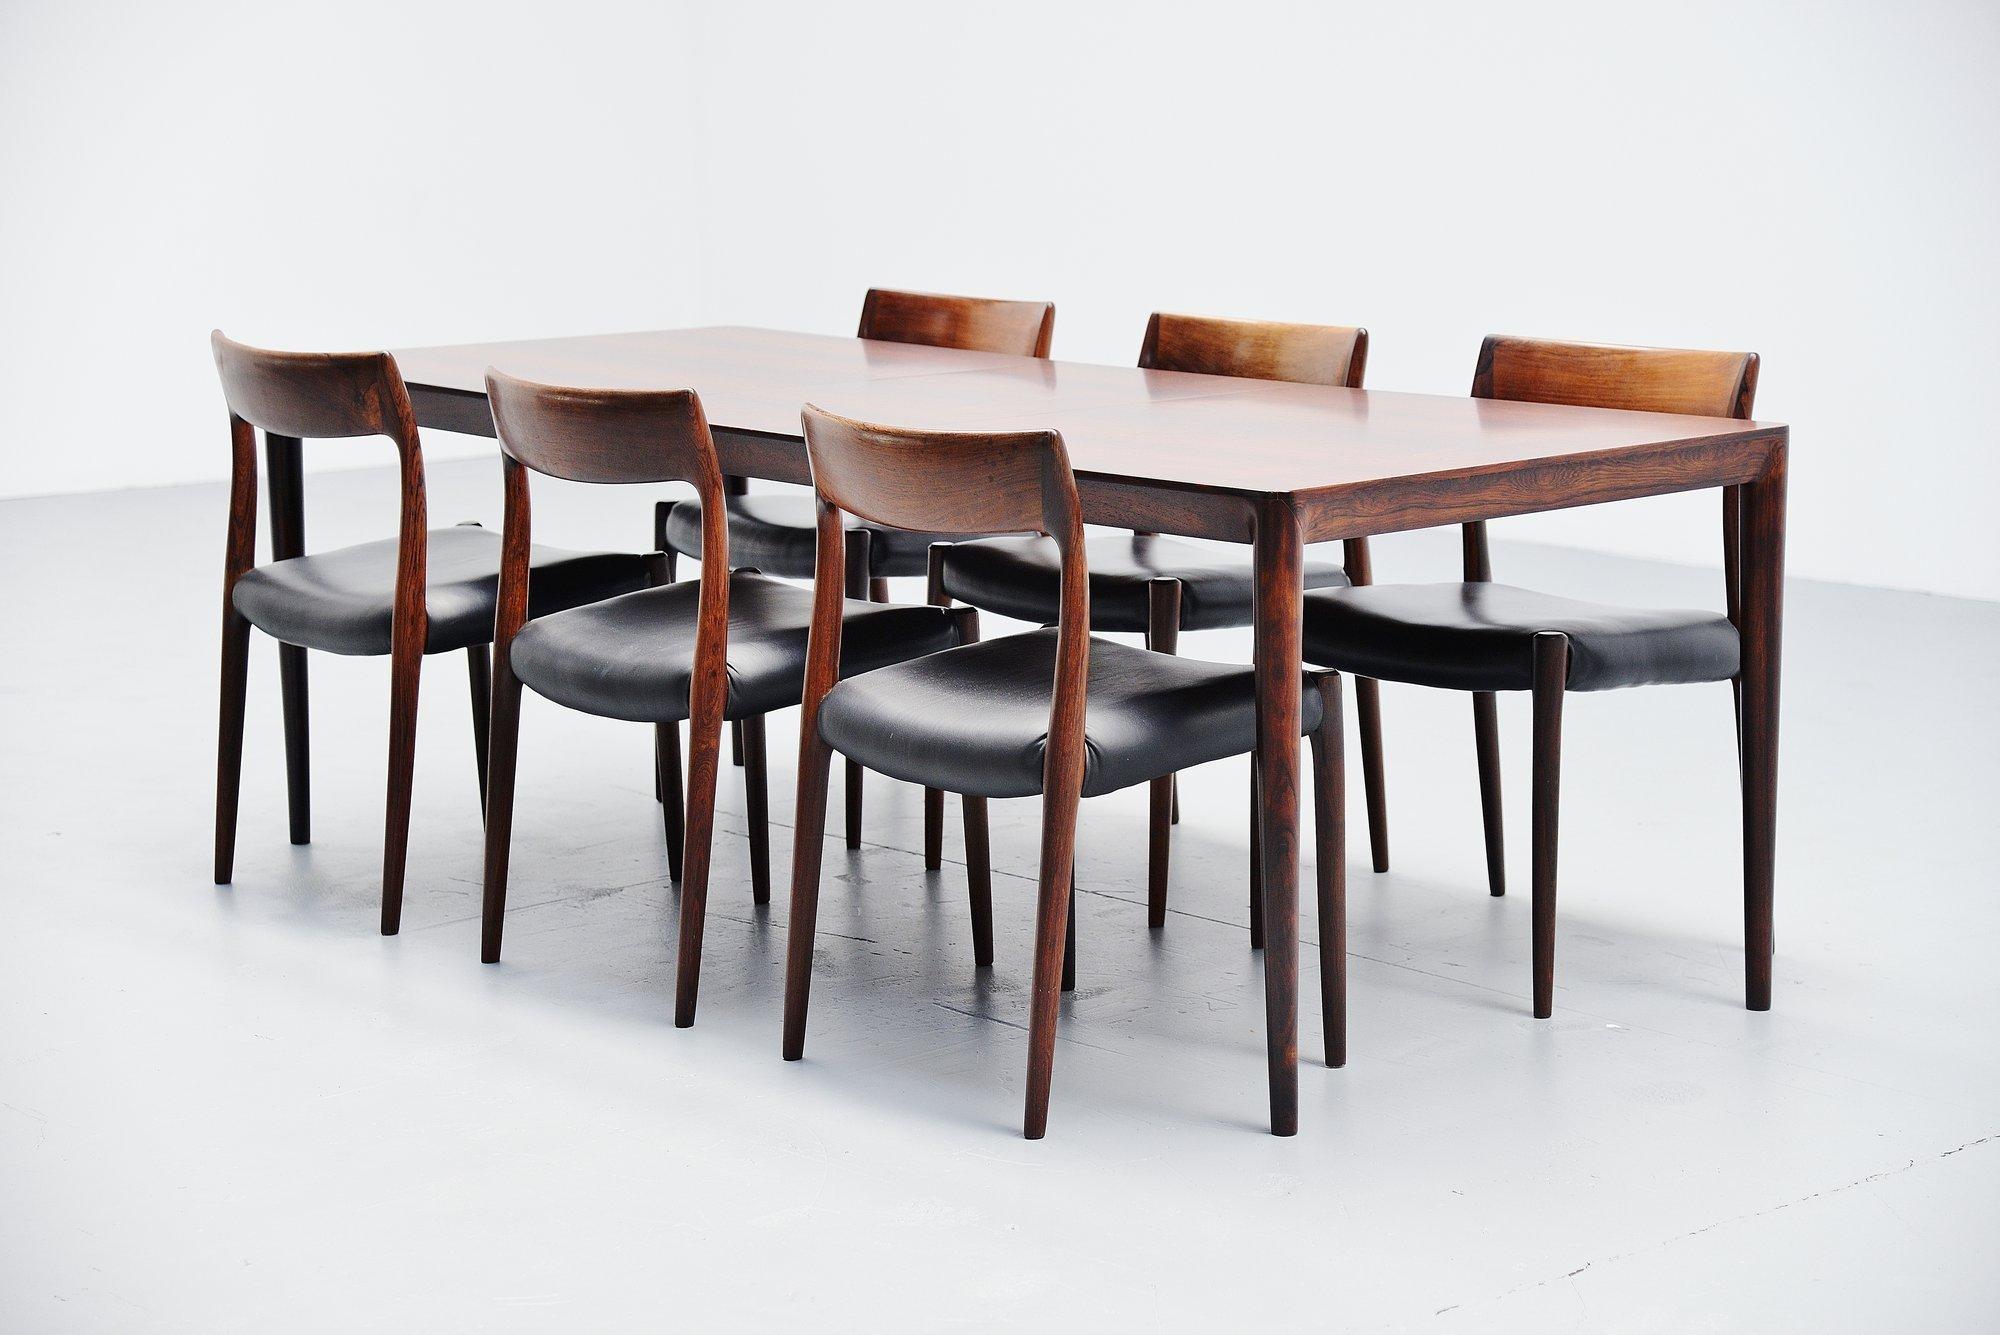 Very nice minimal and slim dining table in rosewood designed by Severin Hansen Jr and manufactured by Haslev Mobelsnedkeri, Denmark, 1960. This table has a fantastic warm rosewood grain to the wood and is in excellent refinished condition. The table